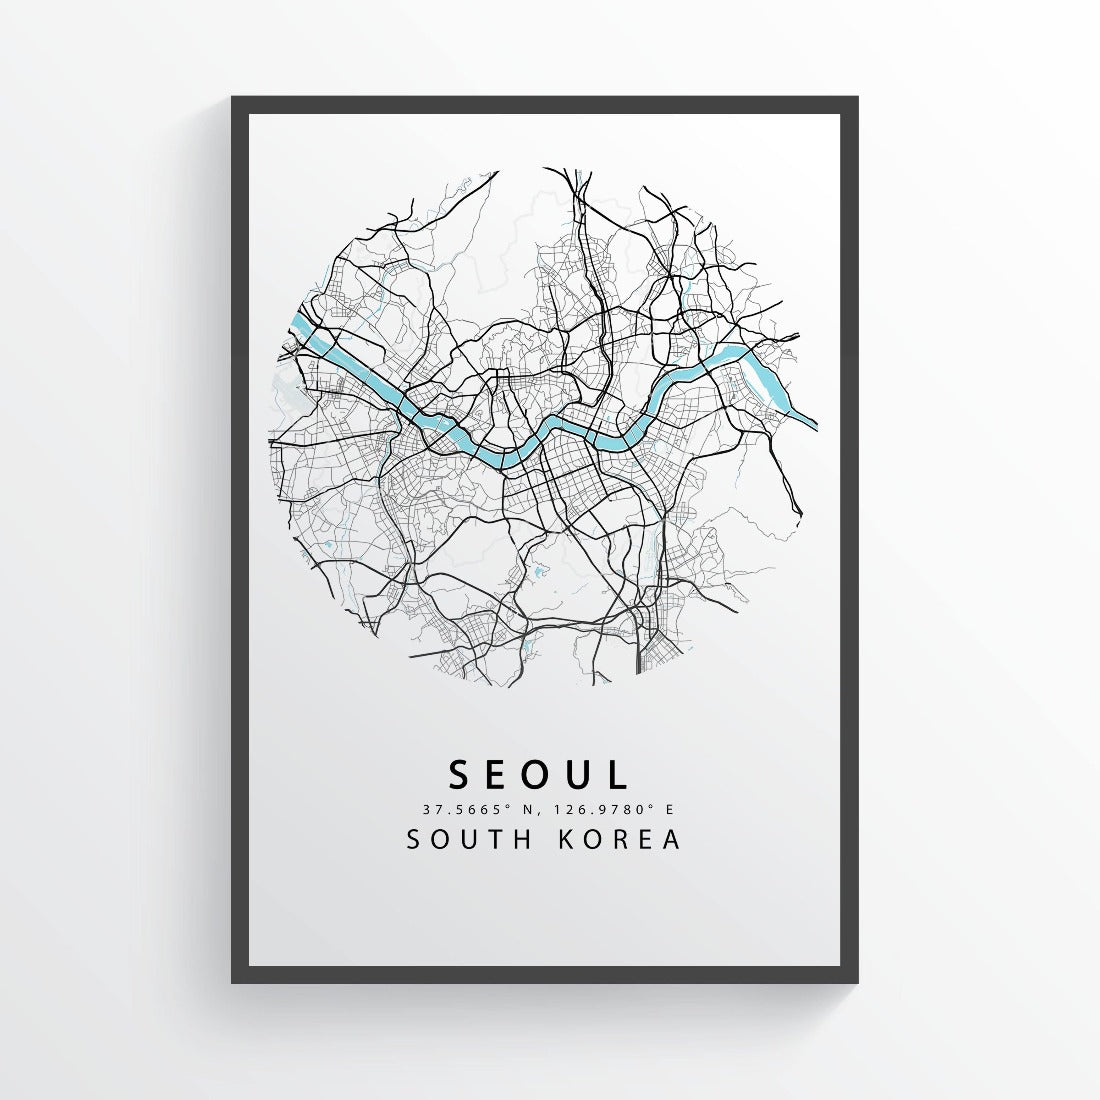 Explore an amazing city with this detailed print of Seoul, South Korea. Wander the streets of Seoul by following this intricate map. Packed with landmarks, this map is a must-have for any traveler or history buff. With its vibrant colors and artful design, this print is a beautiful way to commemorate your time in Seoul. Hang it on your wall as a reminder of your amazing trip.